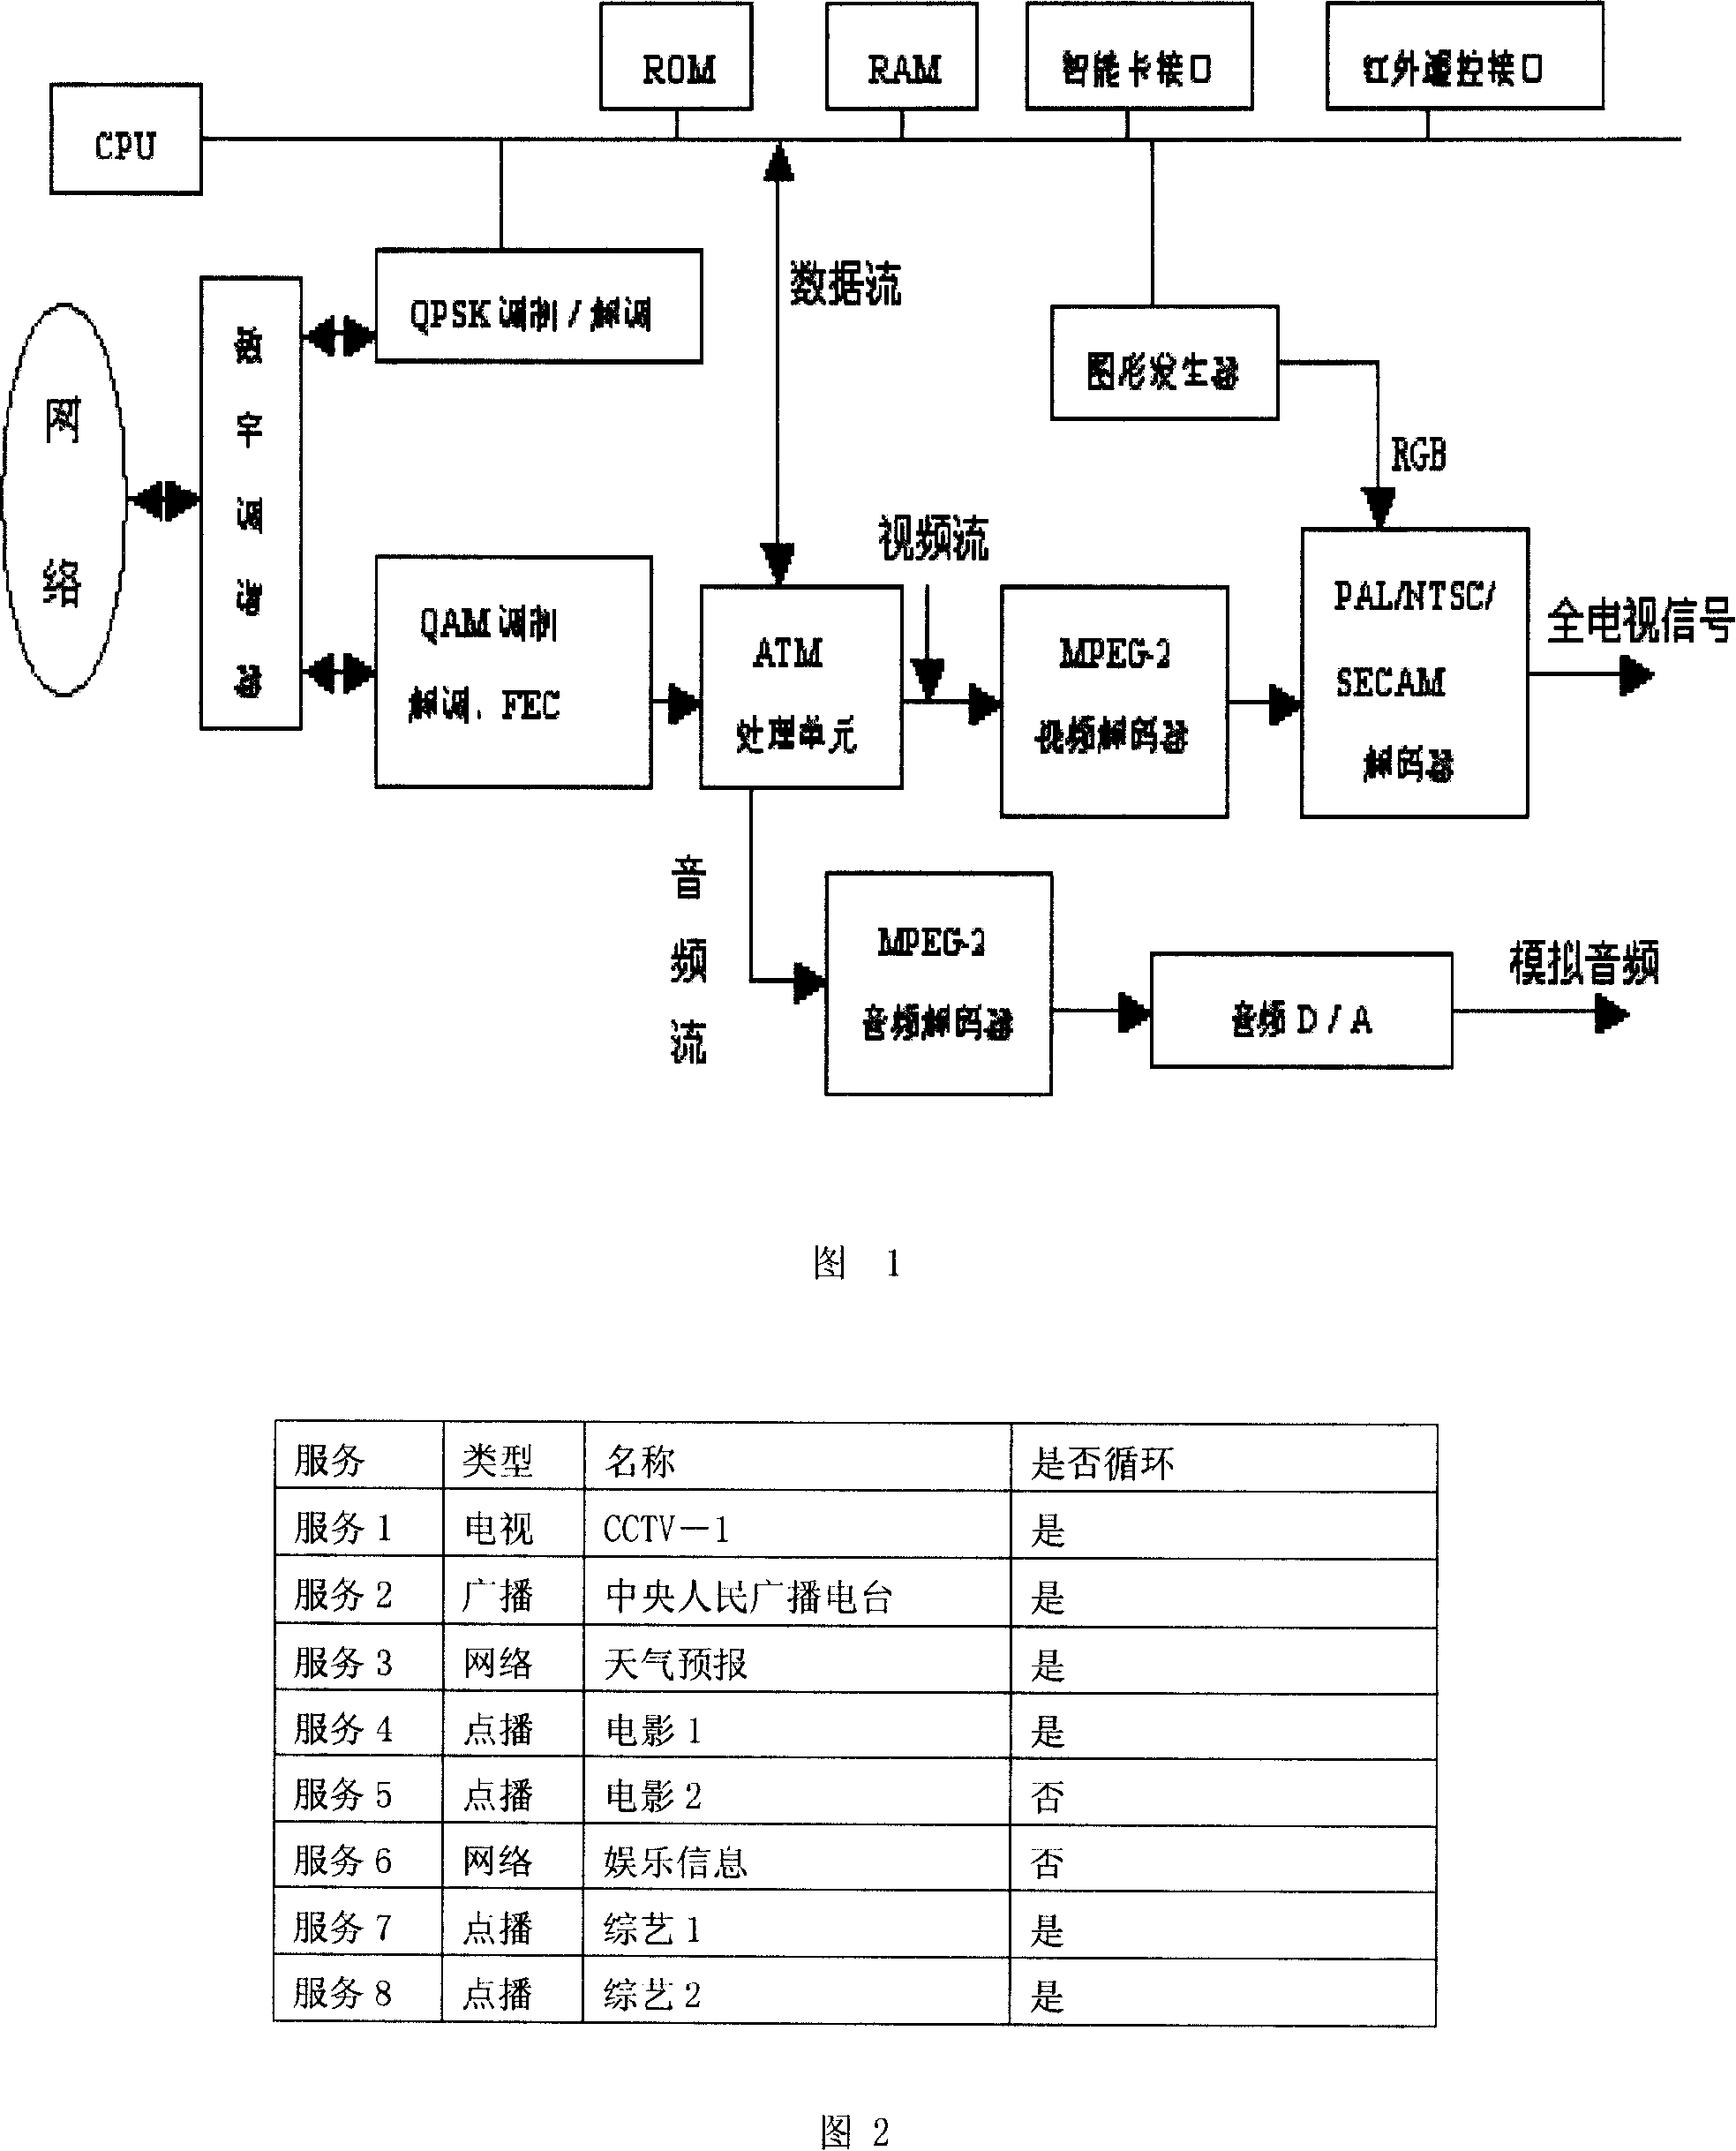 Digital broadcasting television service switching mechanism and switching method